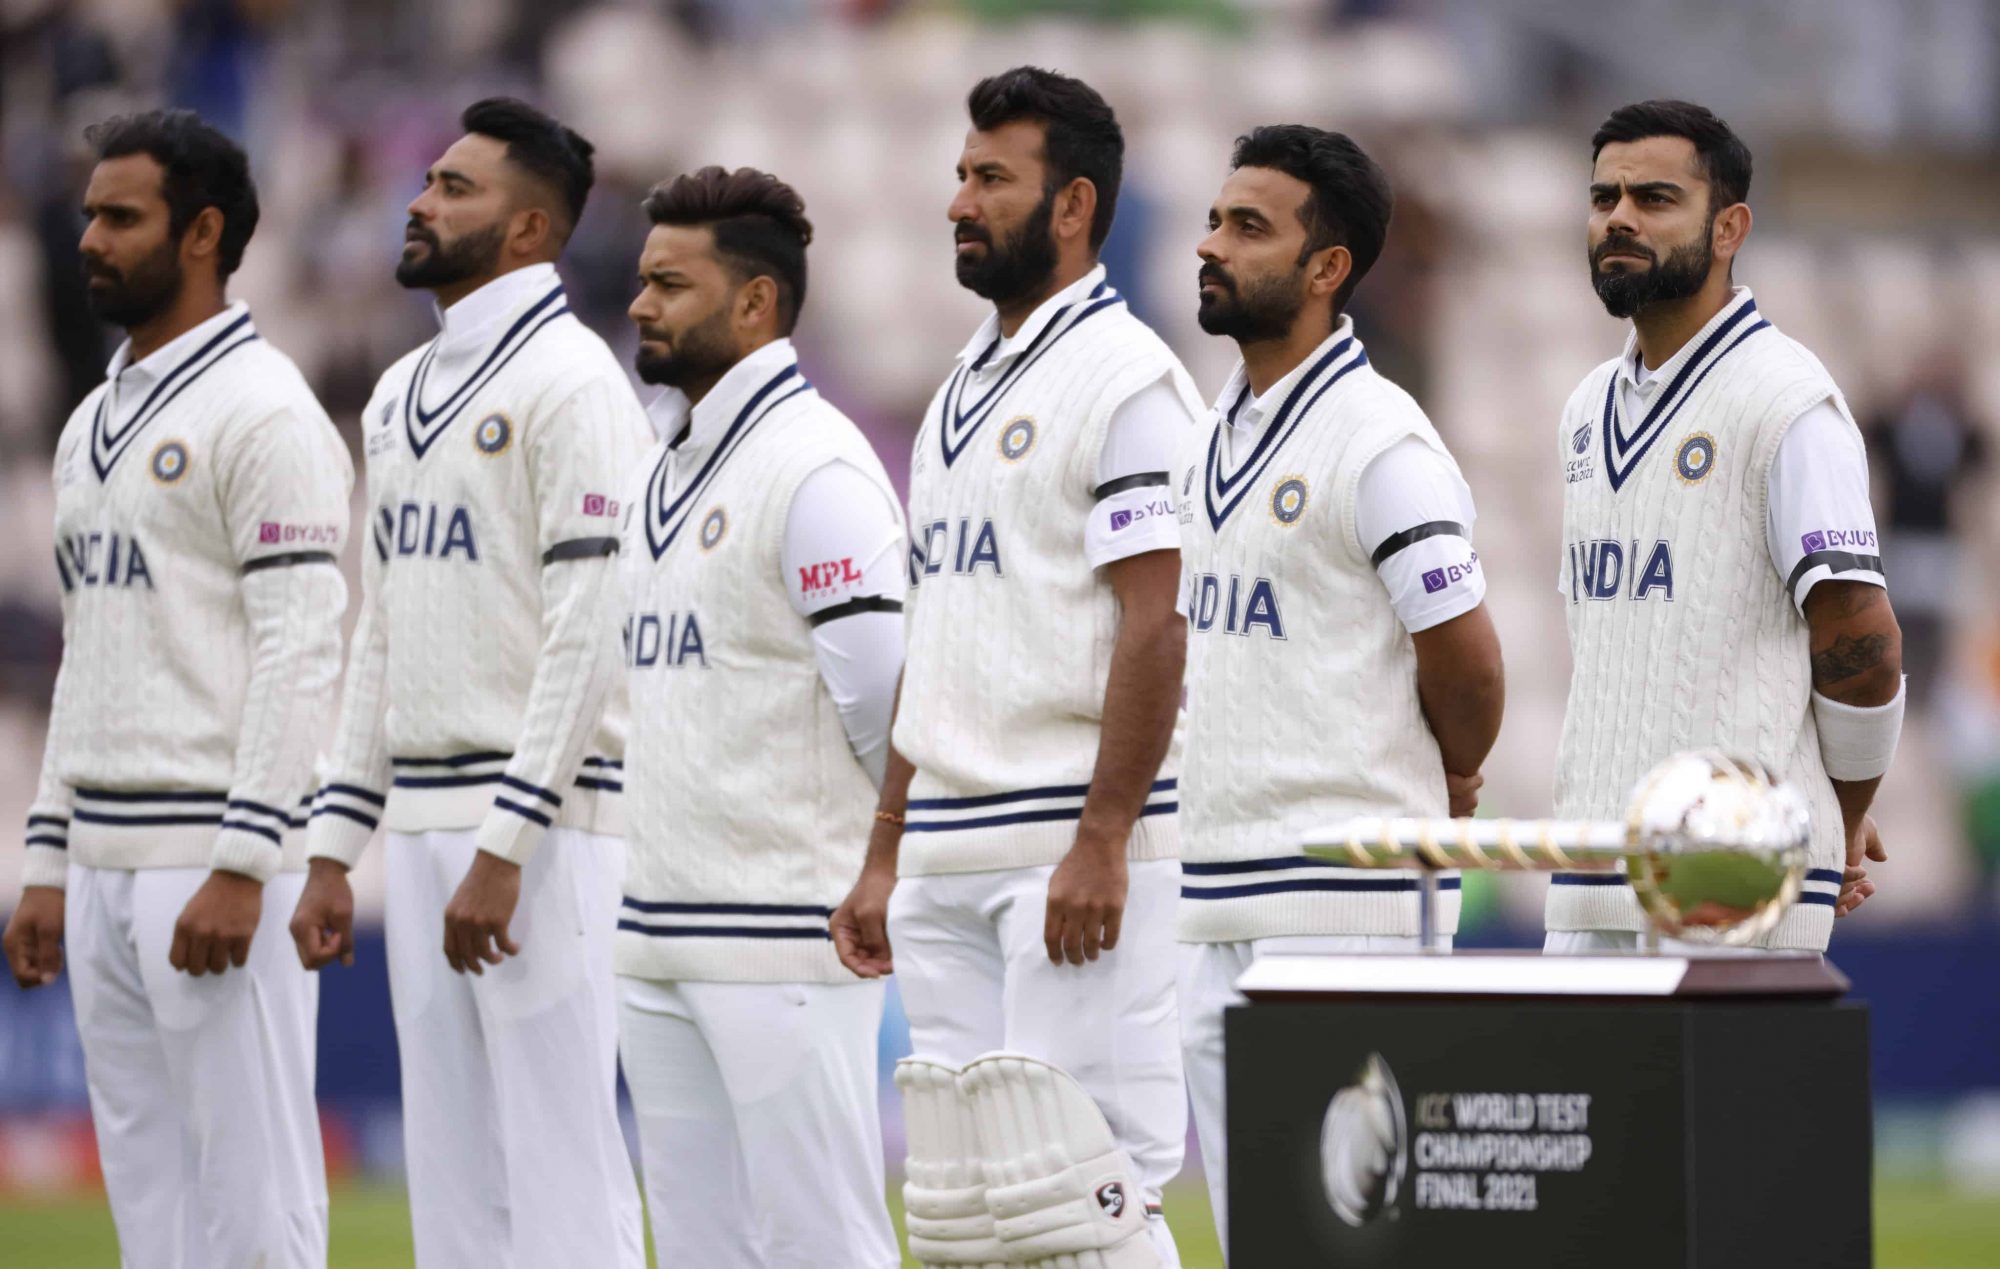 WTC Final: Why Are The Indian Team Players Wearing Black Armbands?